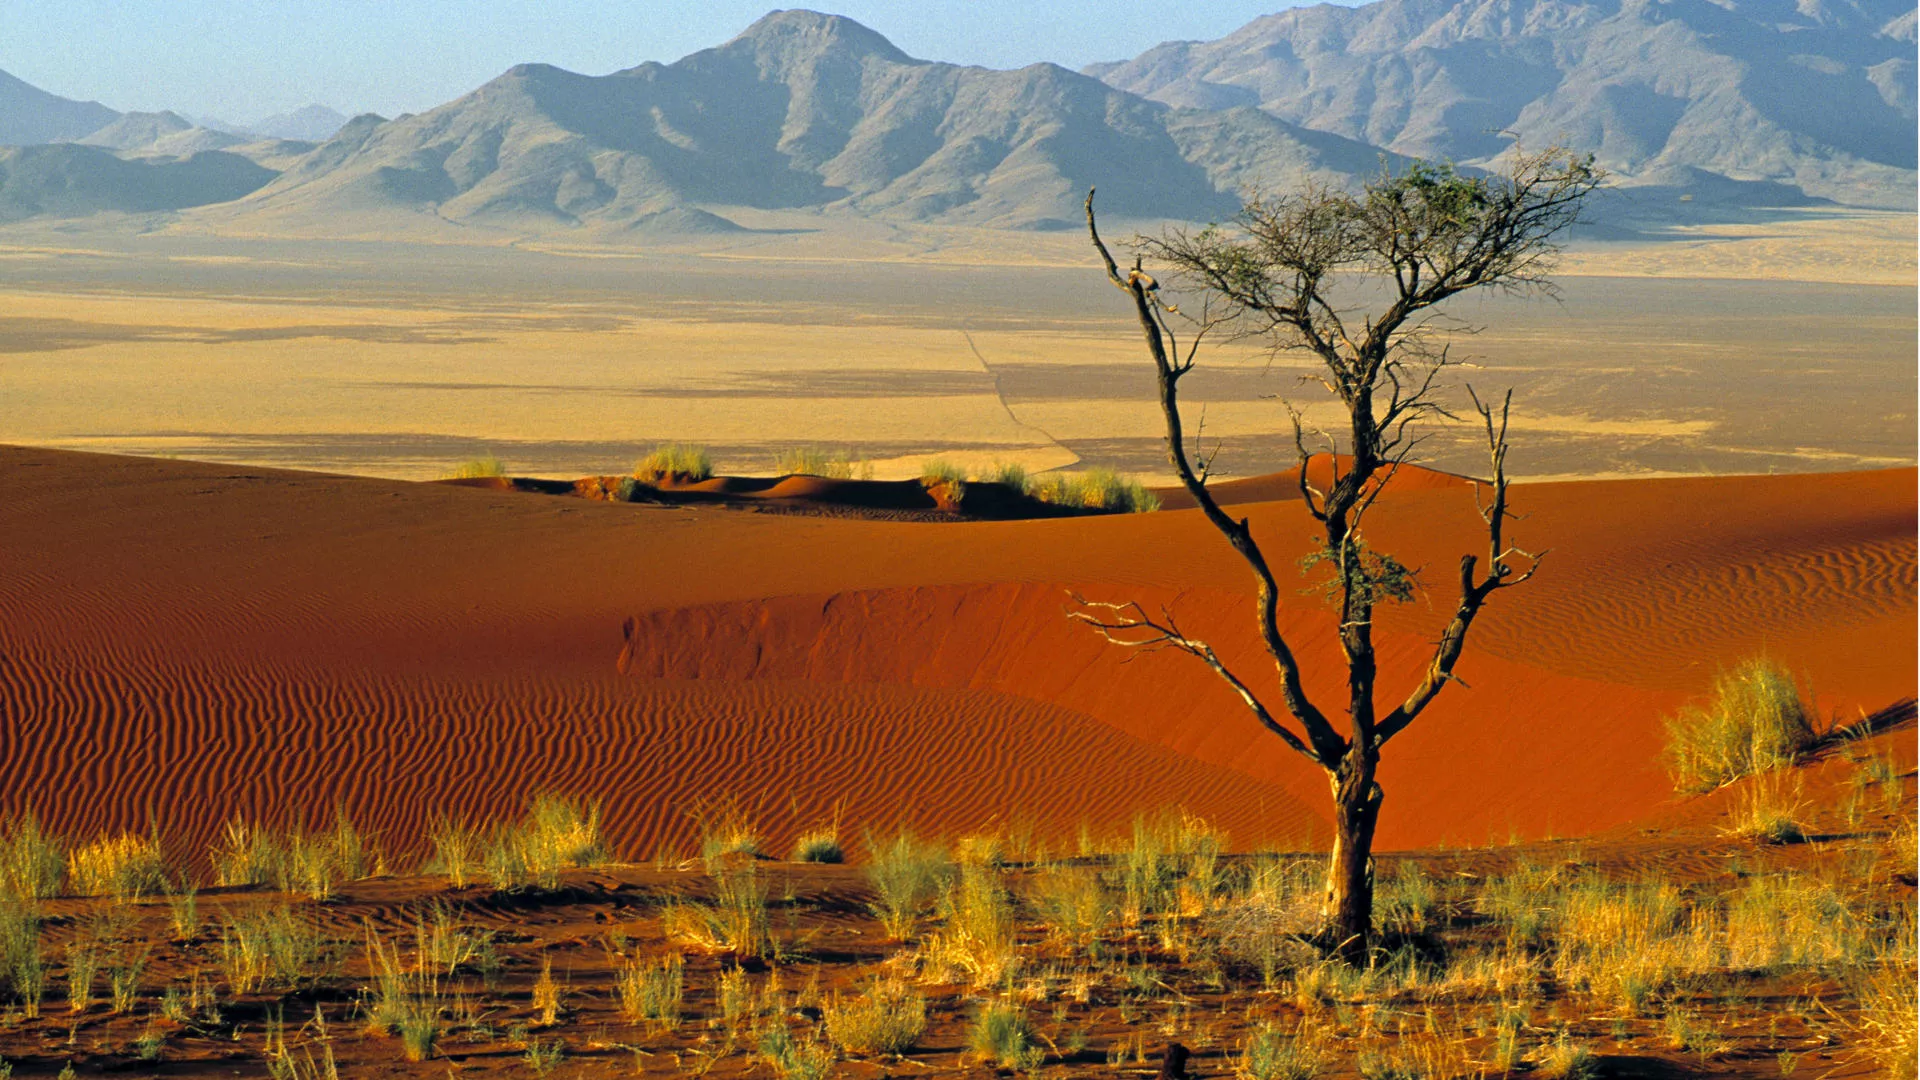 NamibRand Nature Reserve in Namibia, Africa | Nature Reserves - Rated 0.9